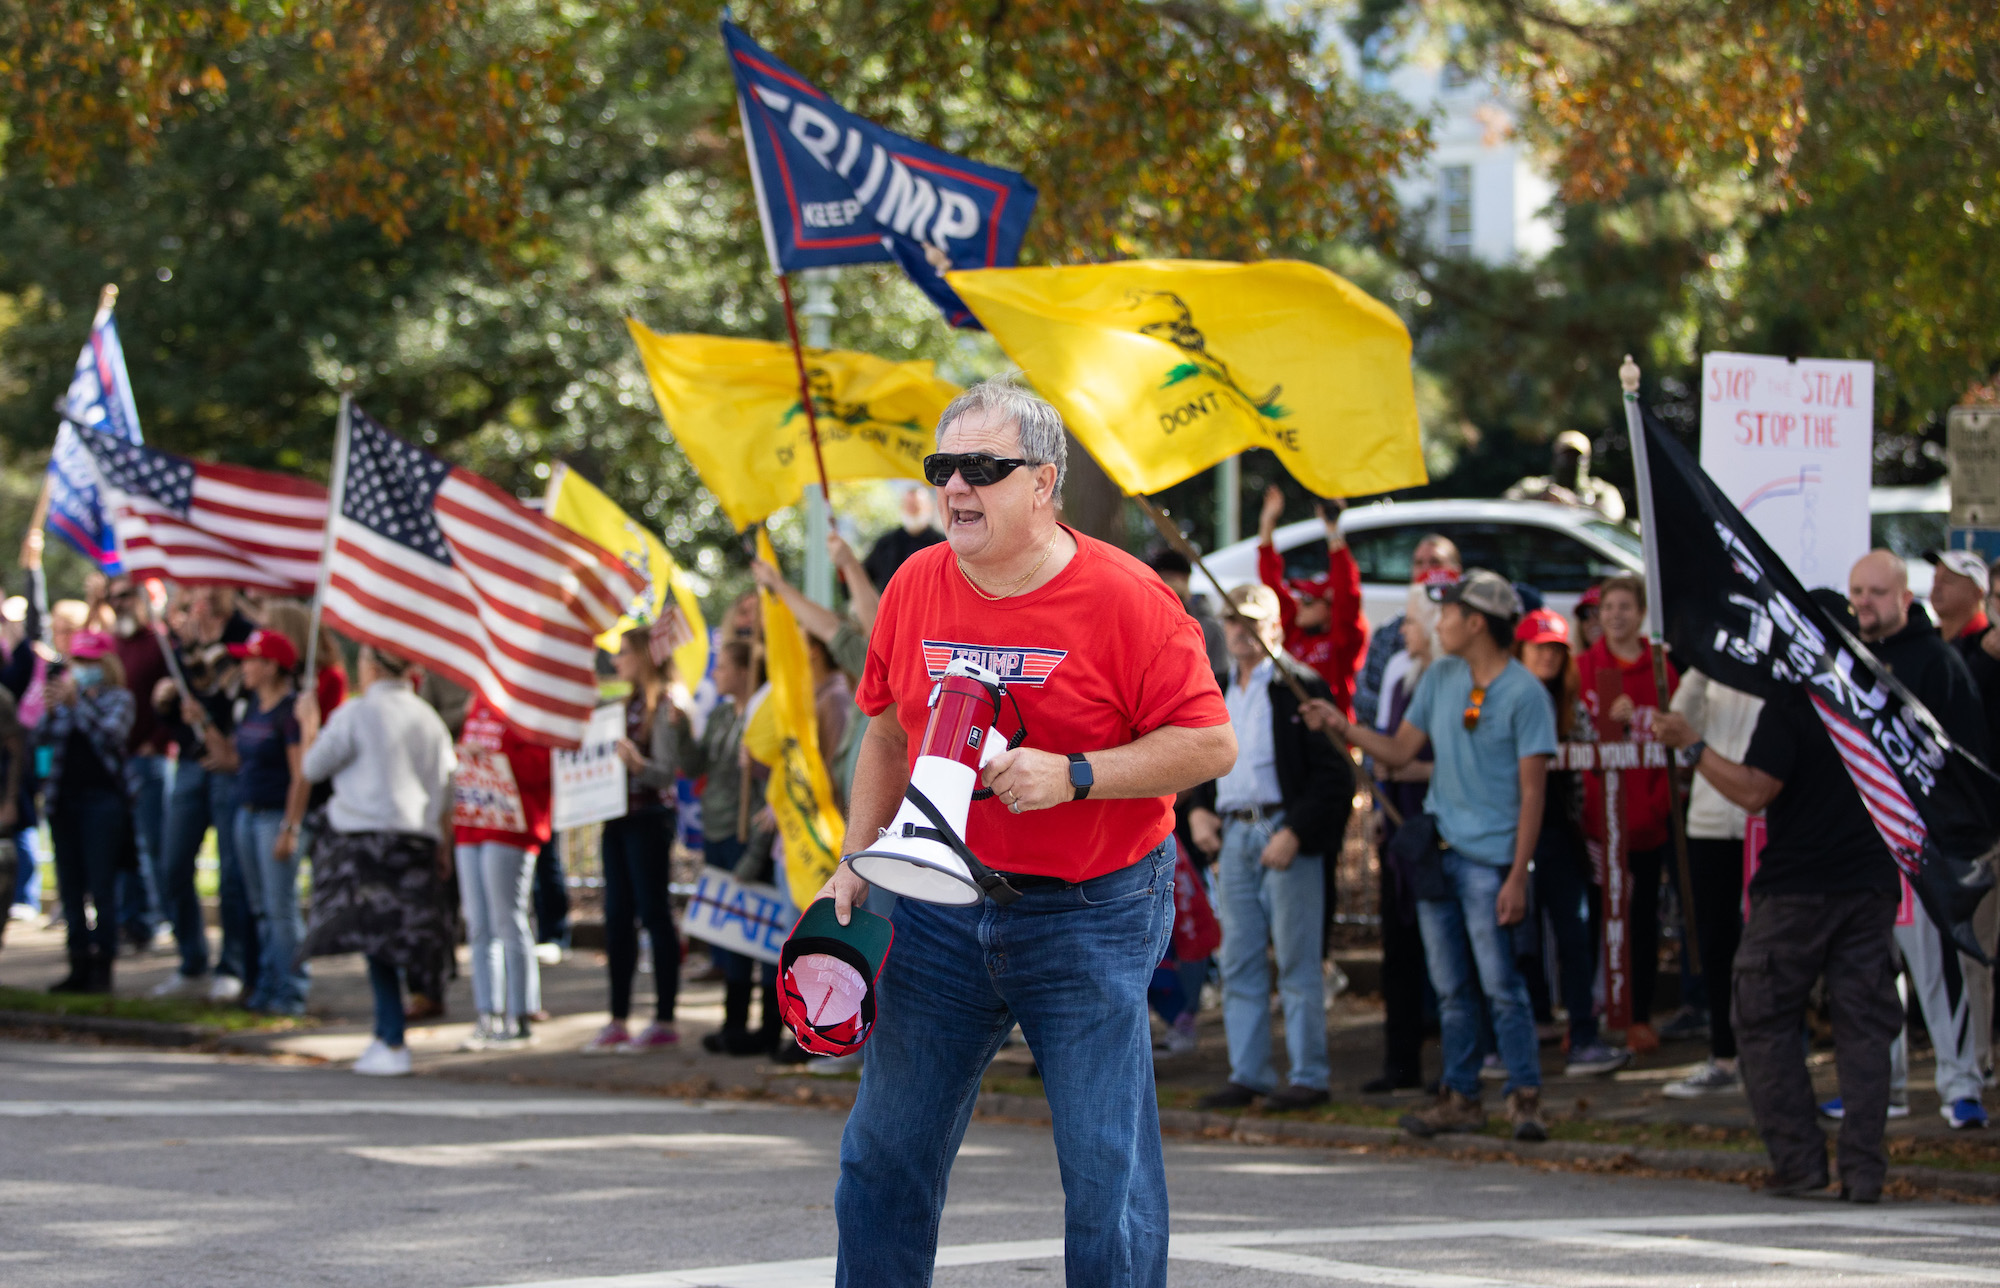 Supporters of US President Donald Trump rally to protest results from the 2020 Presidential election in Raleigh, North Carolina, on November 14, 2020. - Trump supporters are rallying across the country to protest what the the President is calling rampant election fraud perpetrated by the Democratic Party to steal the election. (Photo by Logan Cyrus / AFP) (Photo by LOGAN CYRUS/AFP via Getty Images)